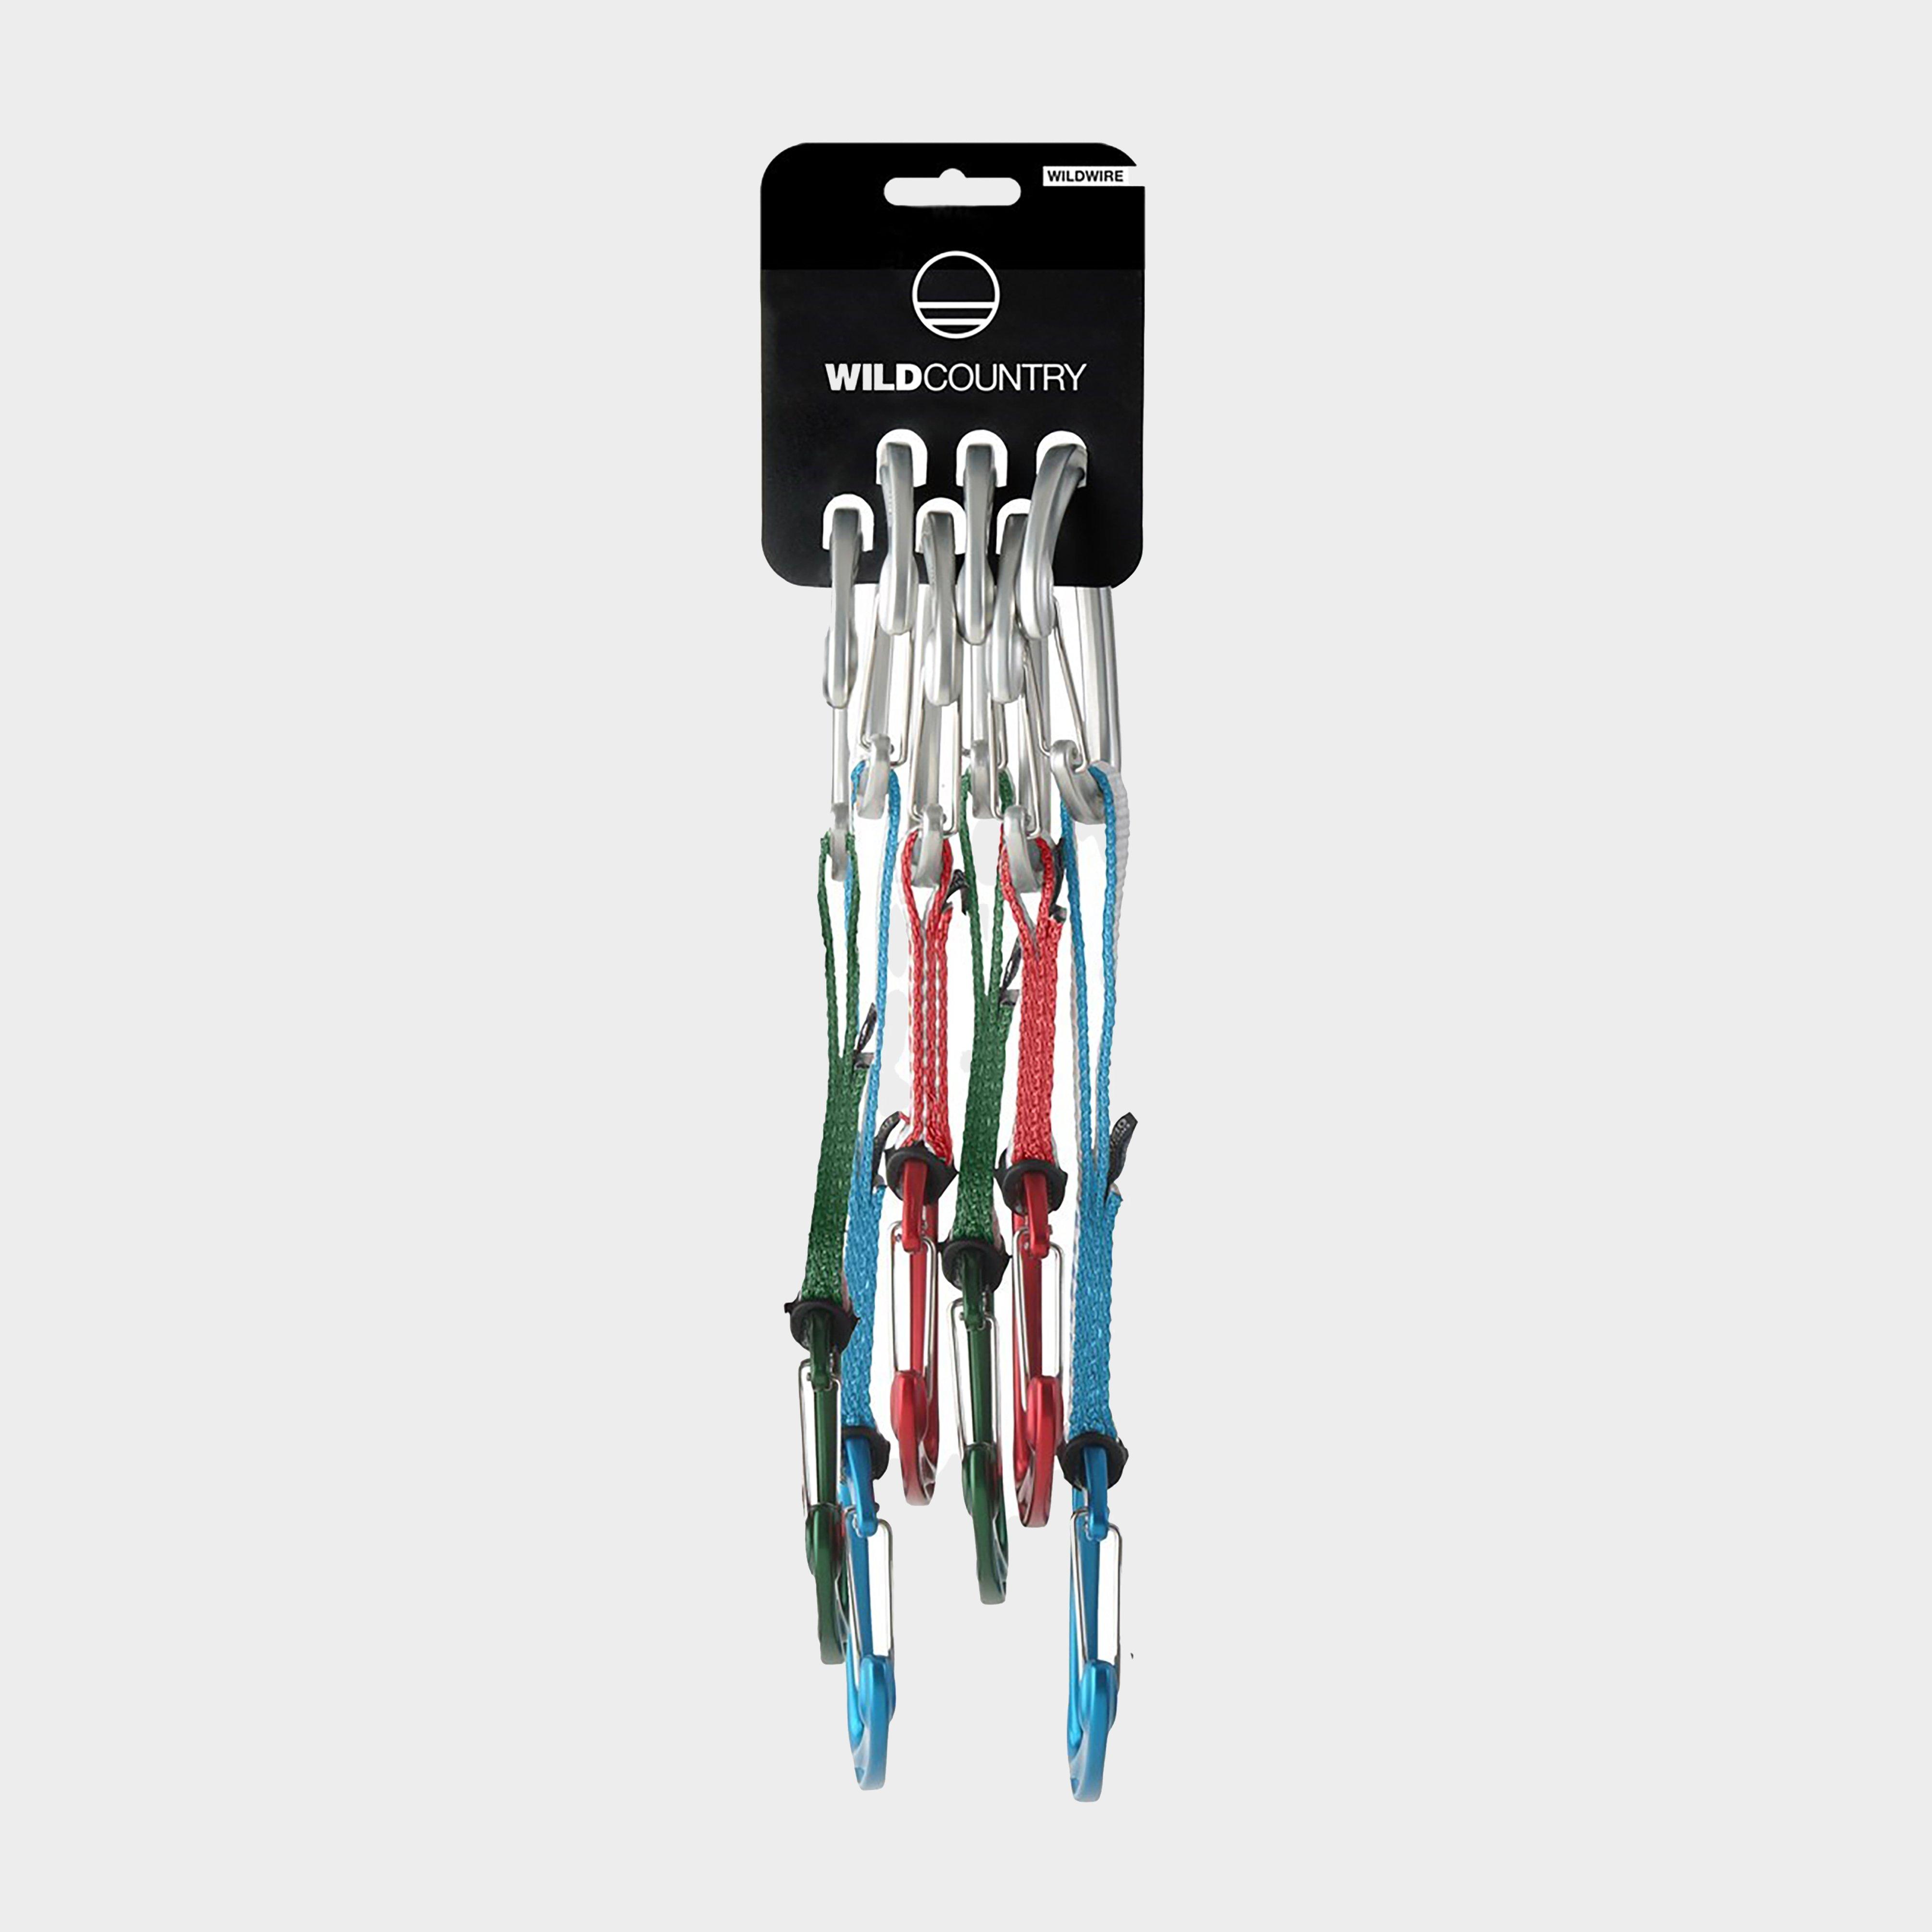  WILD COUNTRY Wildwire Quickdraw Trad 6 Pack, Multi Coloured